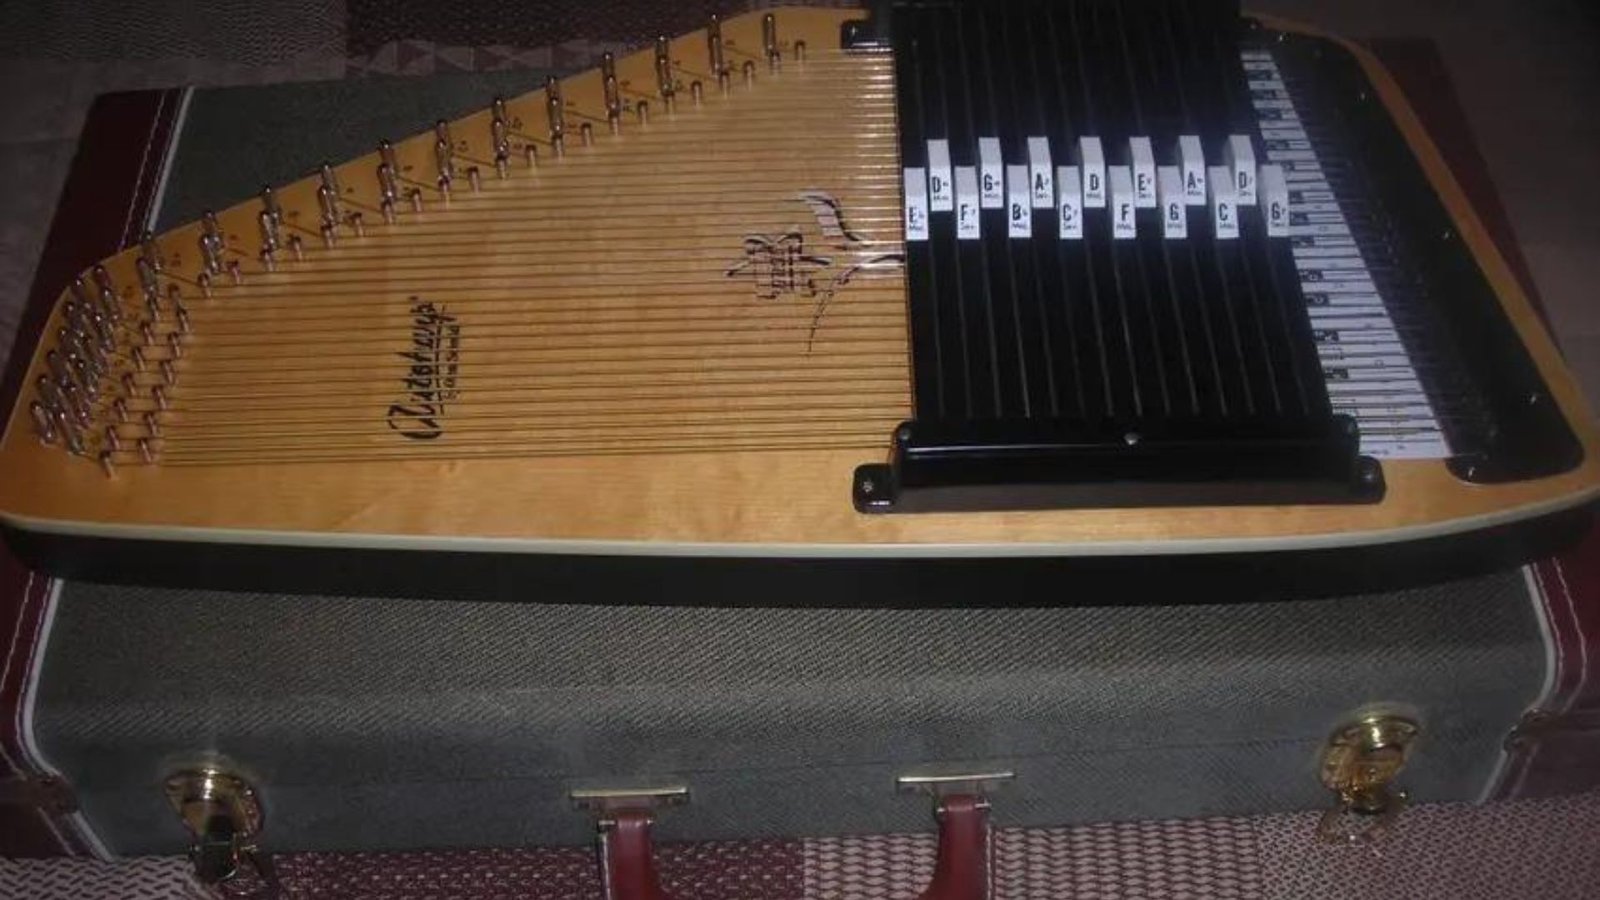 How to Buy a Used Autoharp Safely